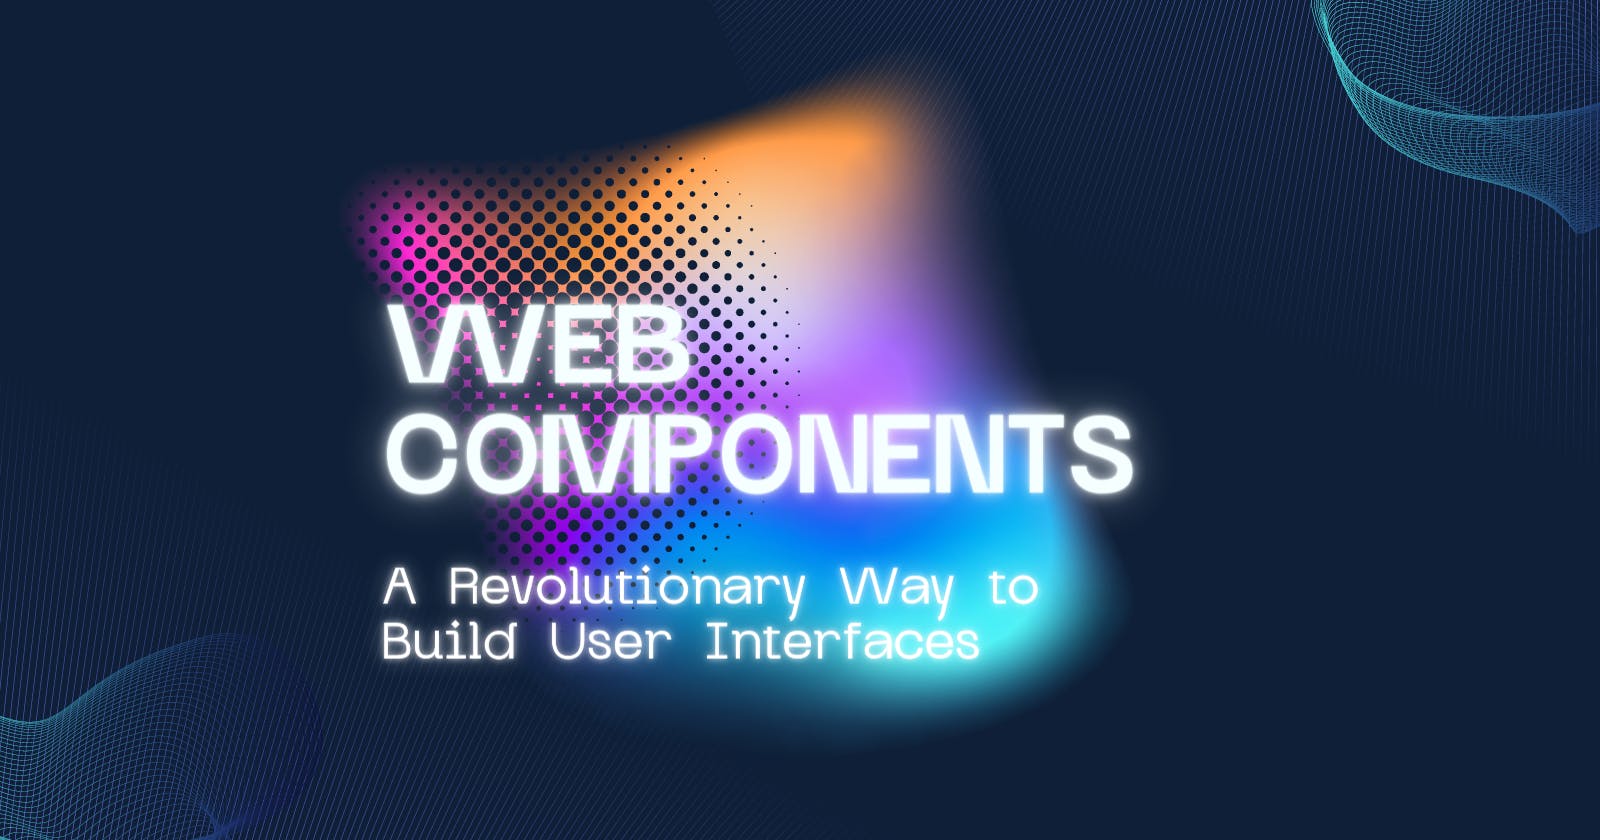 Web Components: A Revolutionary Way to Build User Interfaces